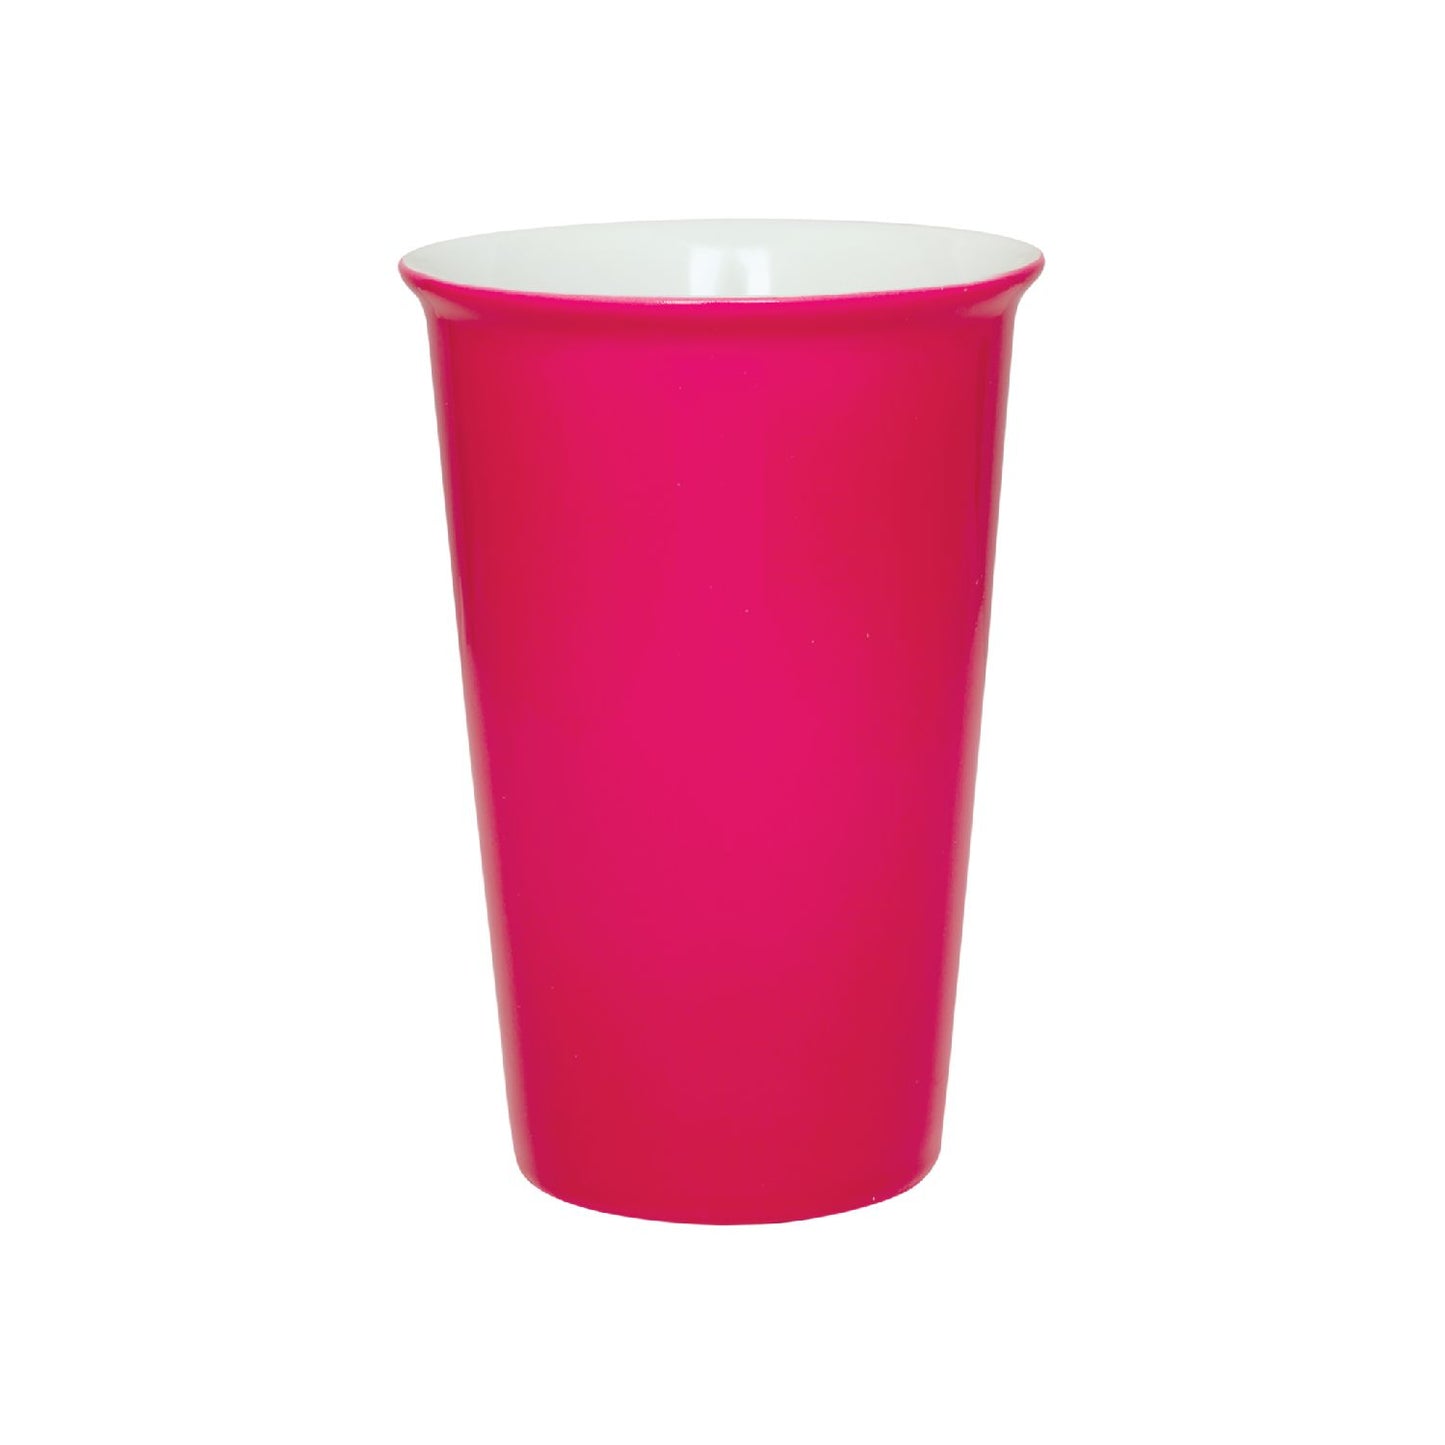 Ceramic Latte Cup With Silicone Lid -14oz